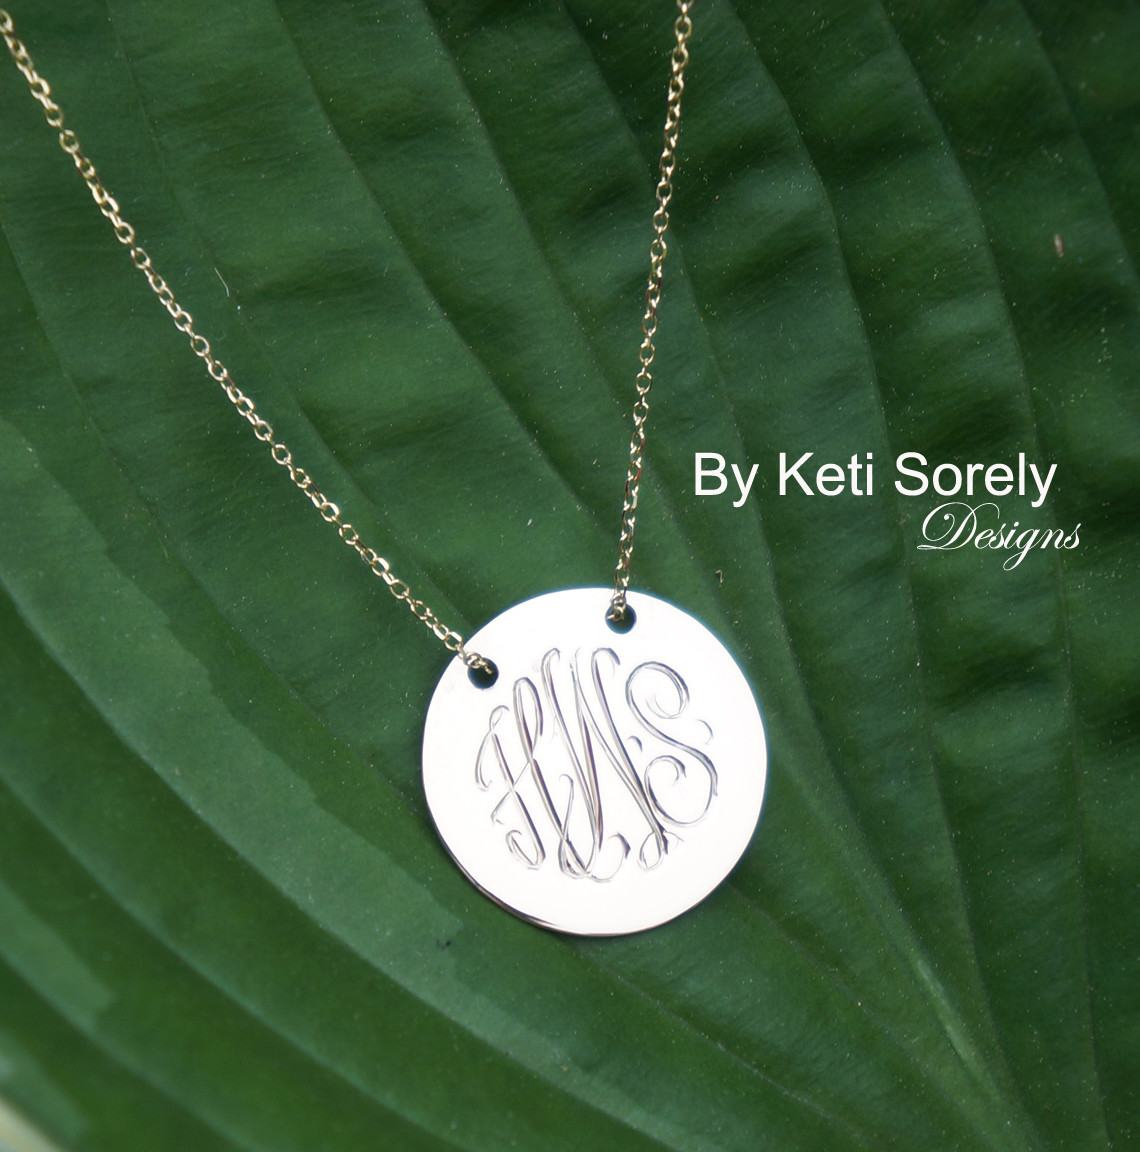 Sterling Silver Monogram Engraved Disc Charm Necklace